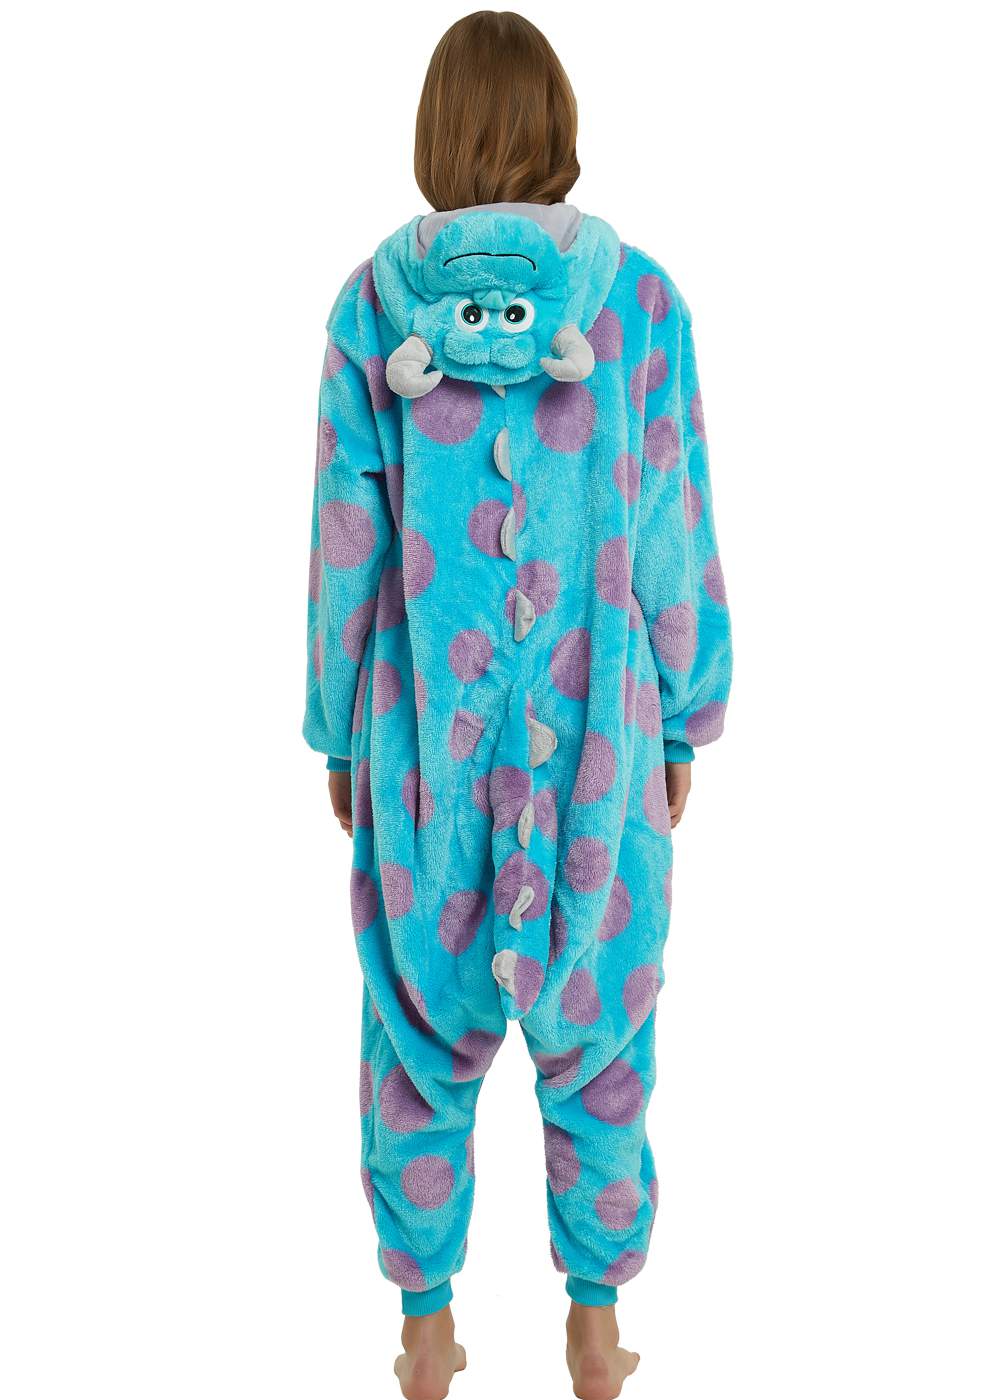 Monster Inc. Sulley Animal Onesie For Adults and Teenagers